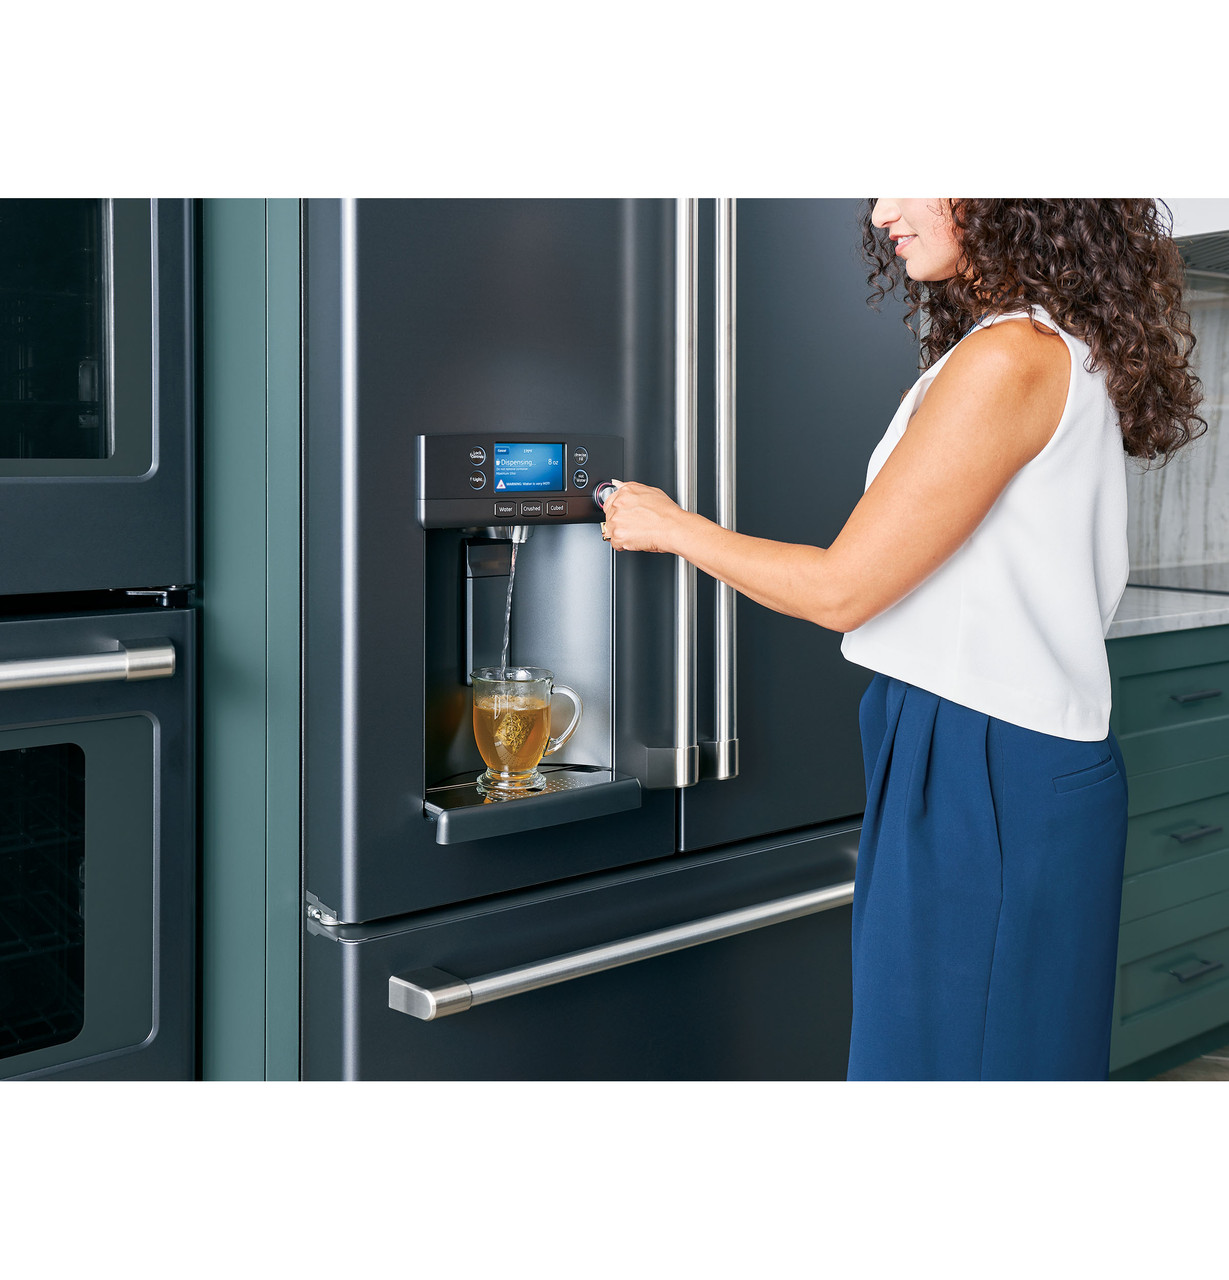 GE Café French door refrigerator with hot water dispenser